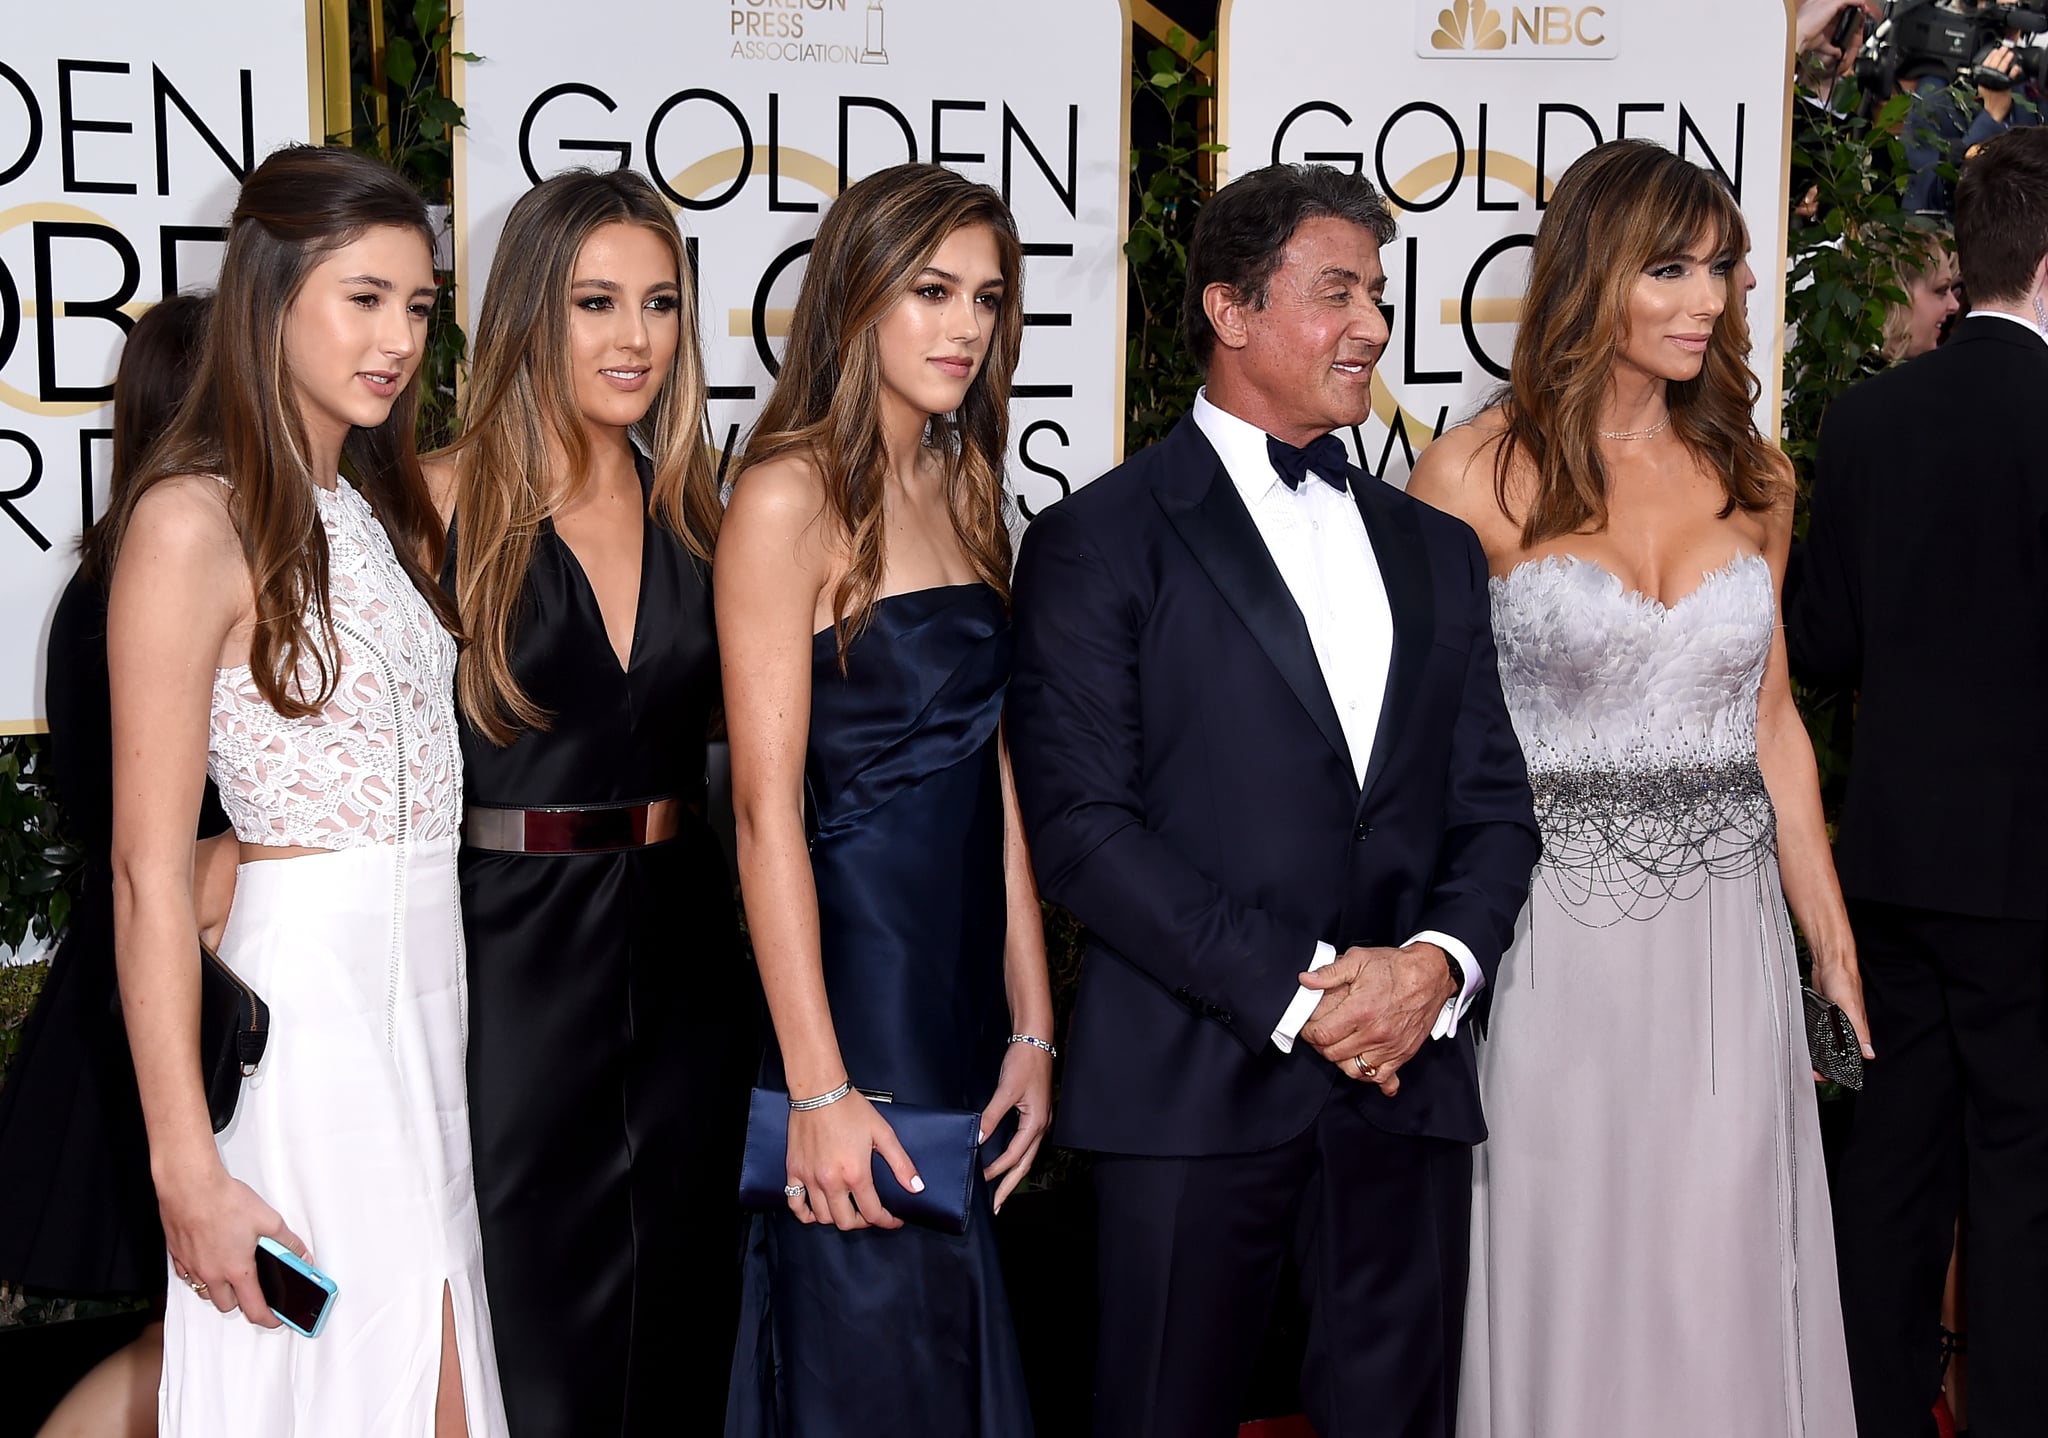 BEVERLY HILLS, CA - JANUARY 10:  Actor Sylvester Stallone (C), daughters Sistene, Sophia and Scarlett, and wife Jennifer Flavin (2nd from R) attend the 73rd Annual Golden Globe Awards held at the Beverly Hilton Hotel on January 10, 2016 in Beverly Hills, California.  (Photo by Steve Granitz/WireImage)